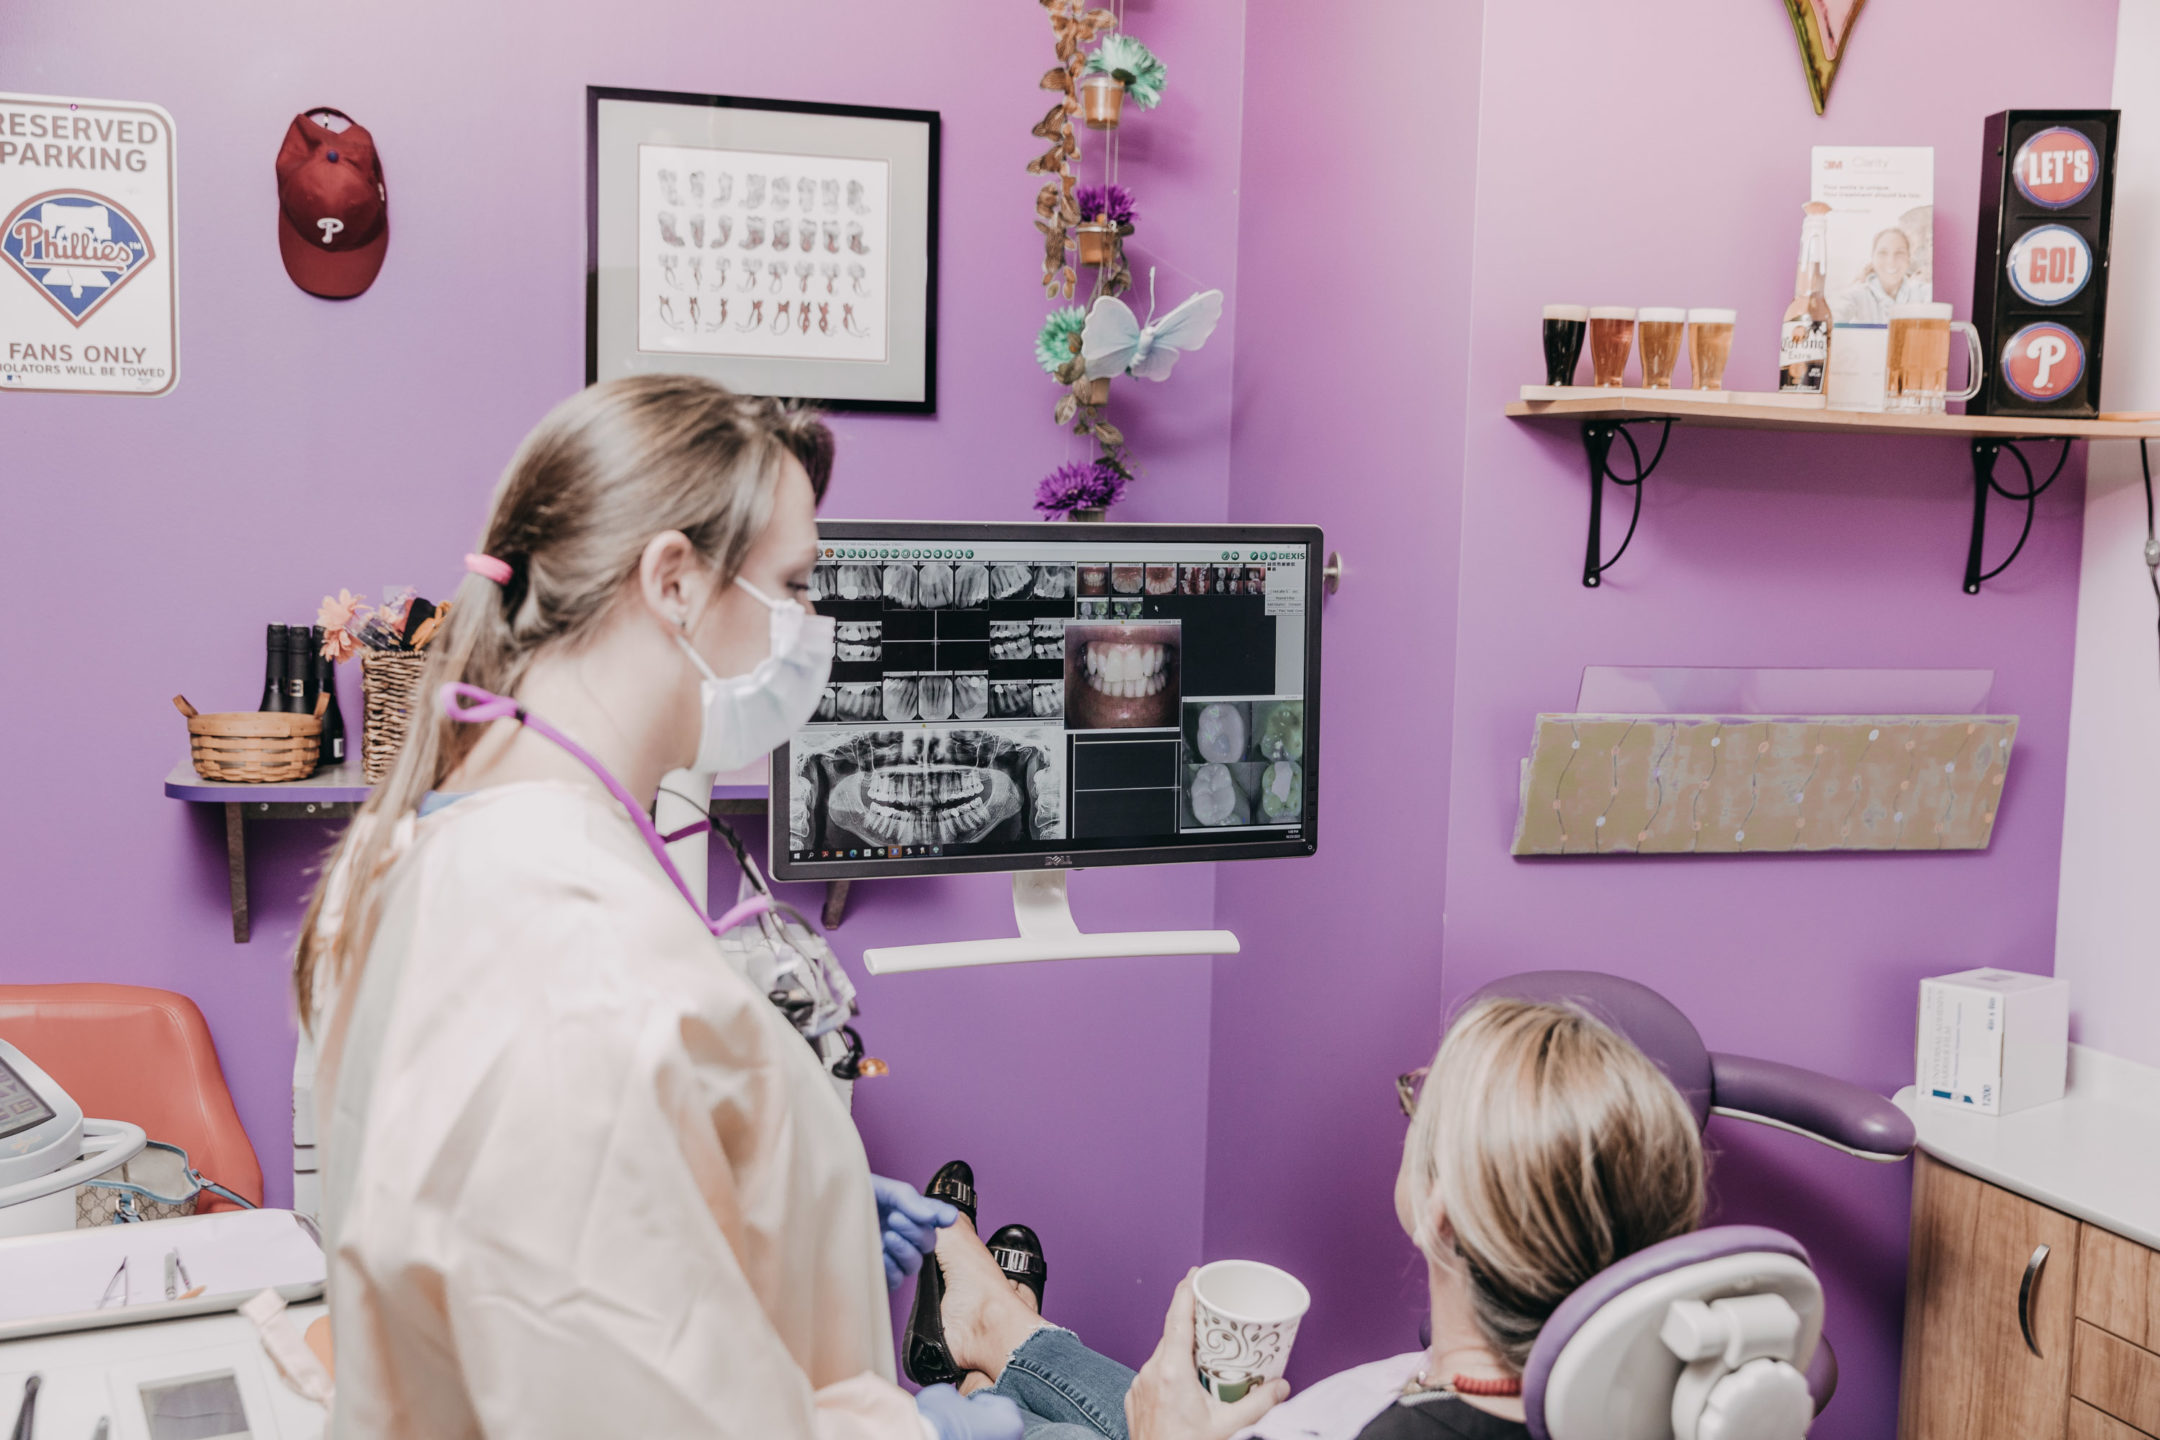  A dentist shows a patient her teeth on a screen as she sits in the dental chair with a cup of coffee. 